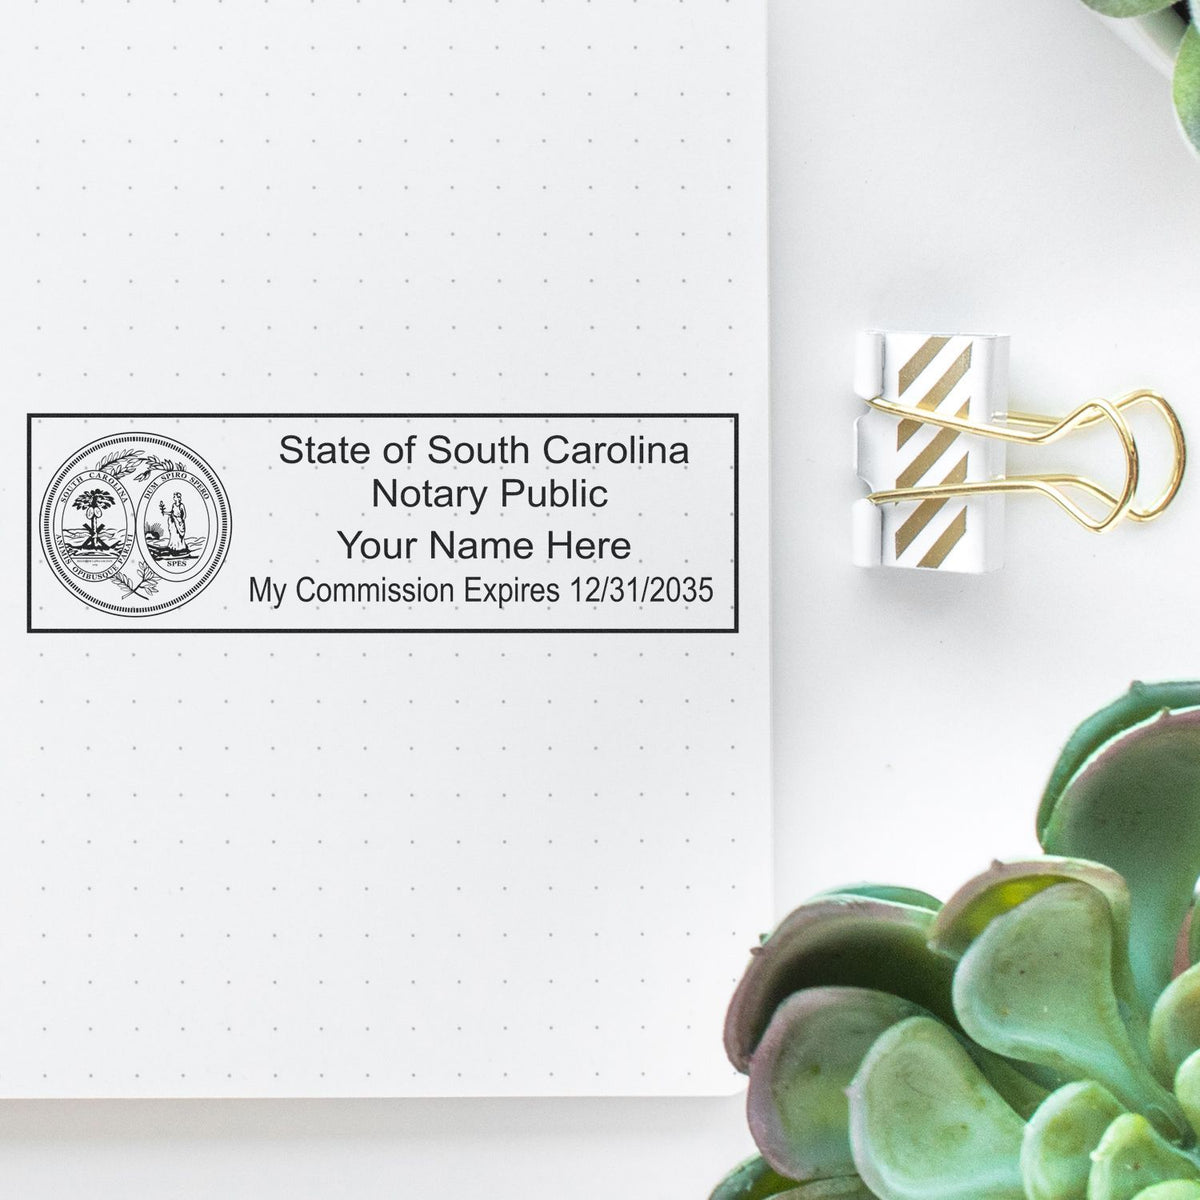 The Super Slim South Carolina Notary Public Stamp stamp impression comes to life with a crisp, detailed photo on paper - showcasing true professional quality.